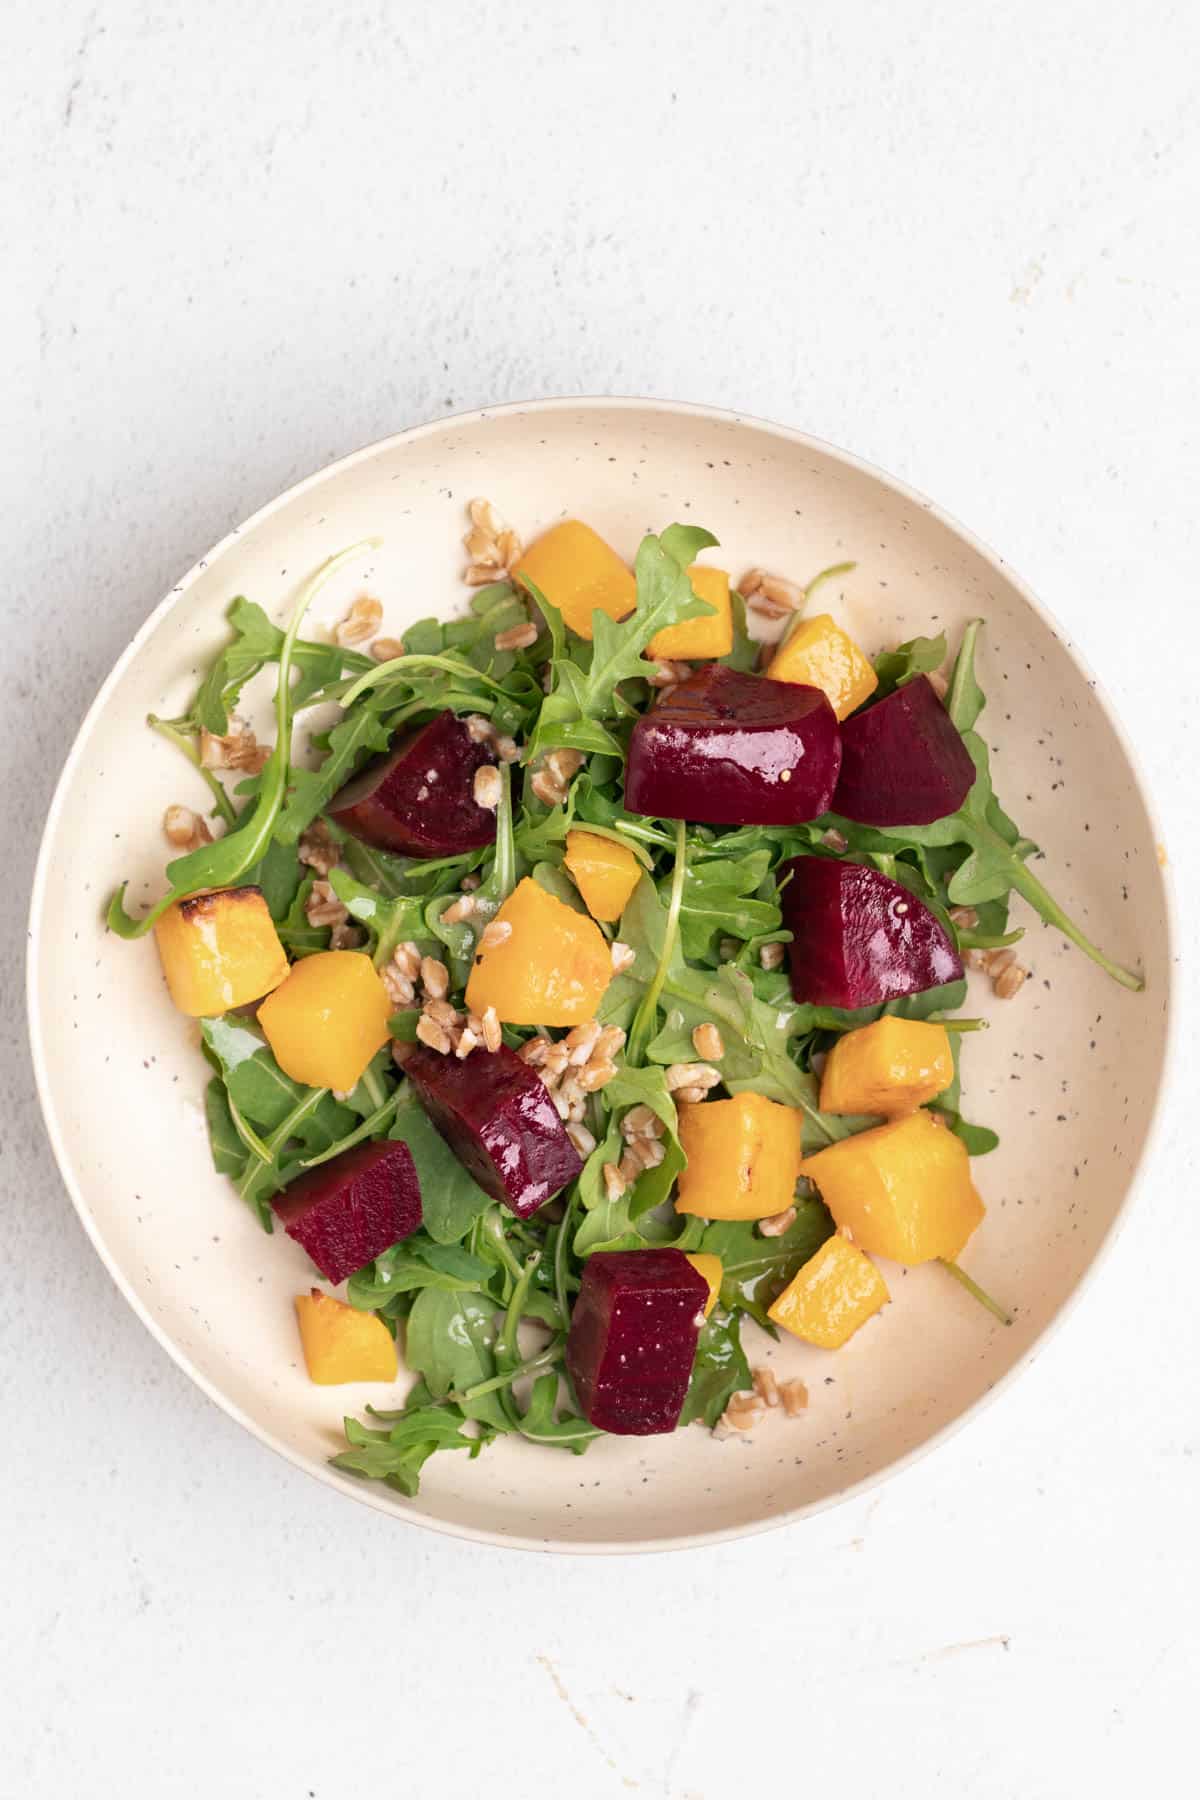 A salad of beets, butternut squash, arugula, and faro inside of a salad bowl.